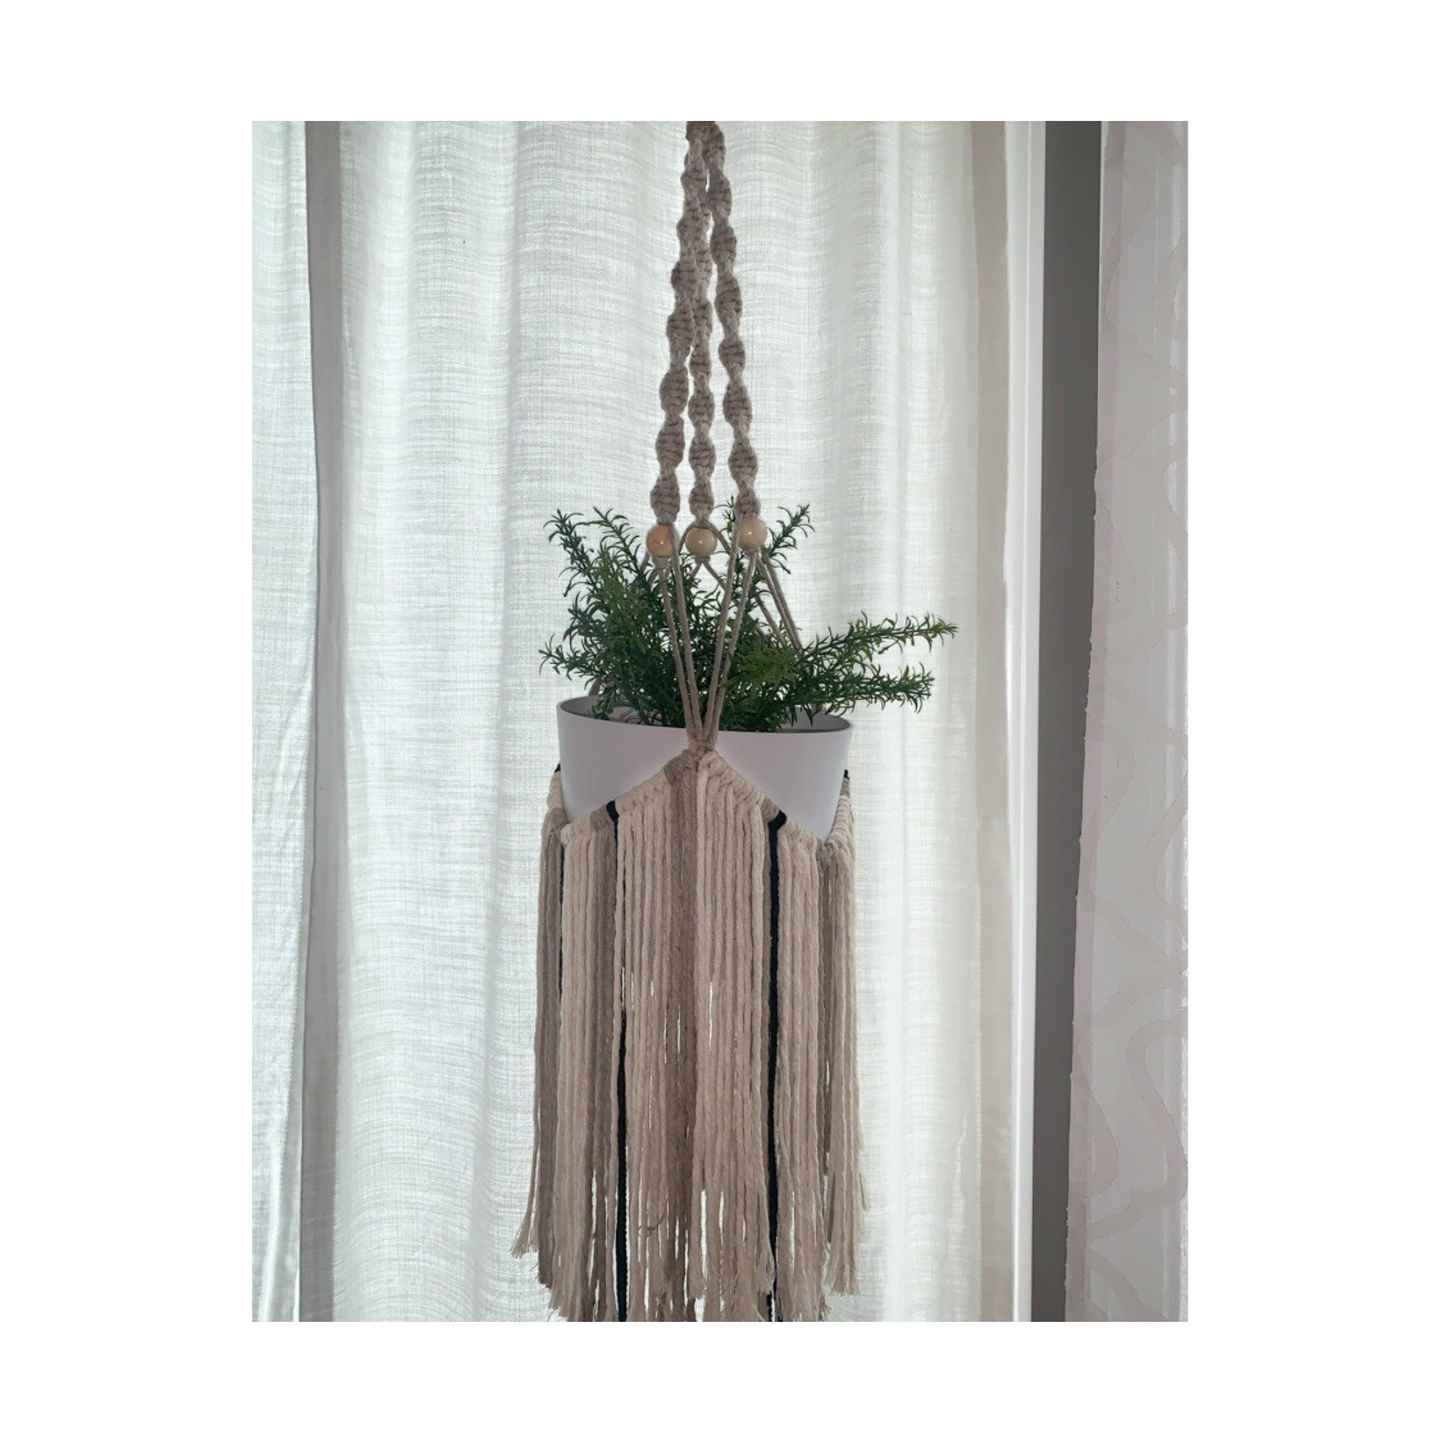 Macrame fringed plant hanger with multi colored fringe and a few accent beads.